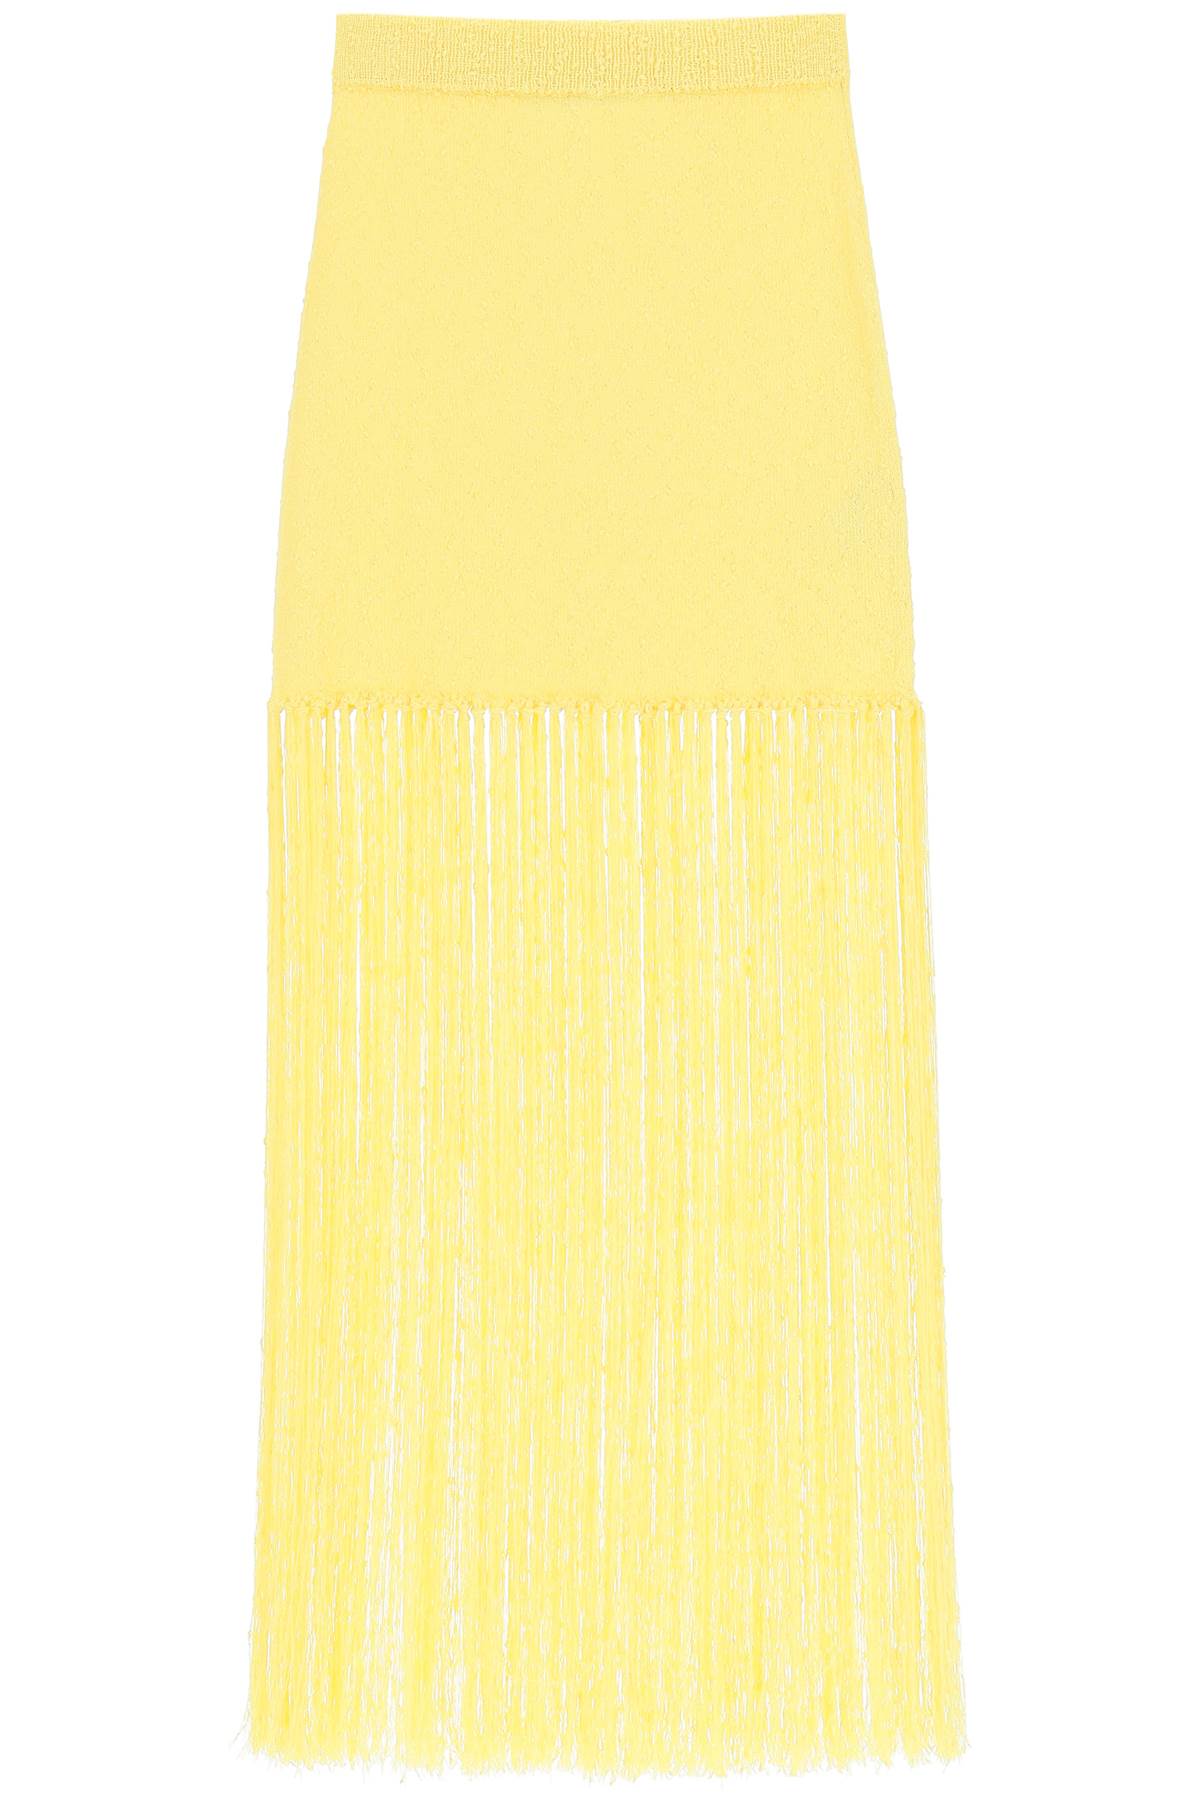 CASABLANCA KNIT SKIRT WITH FRINGES